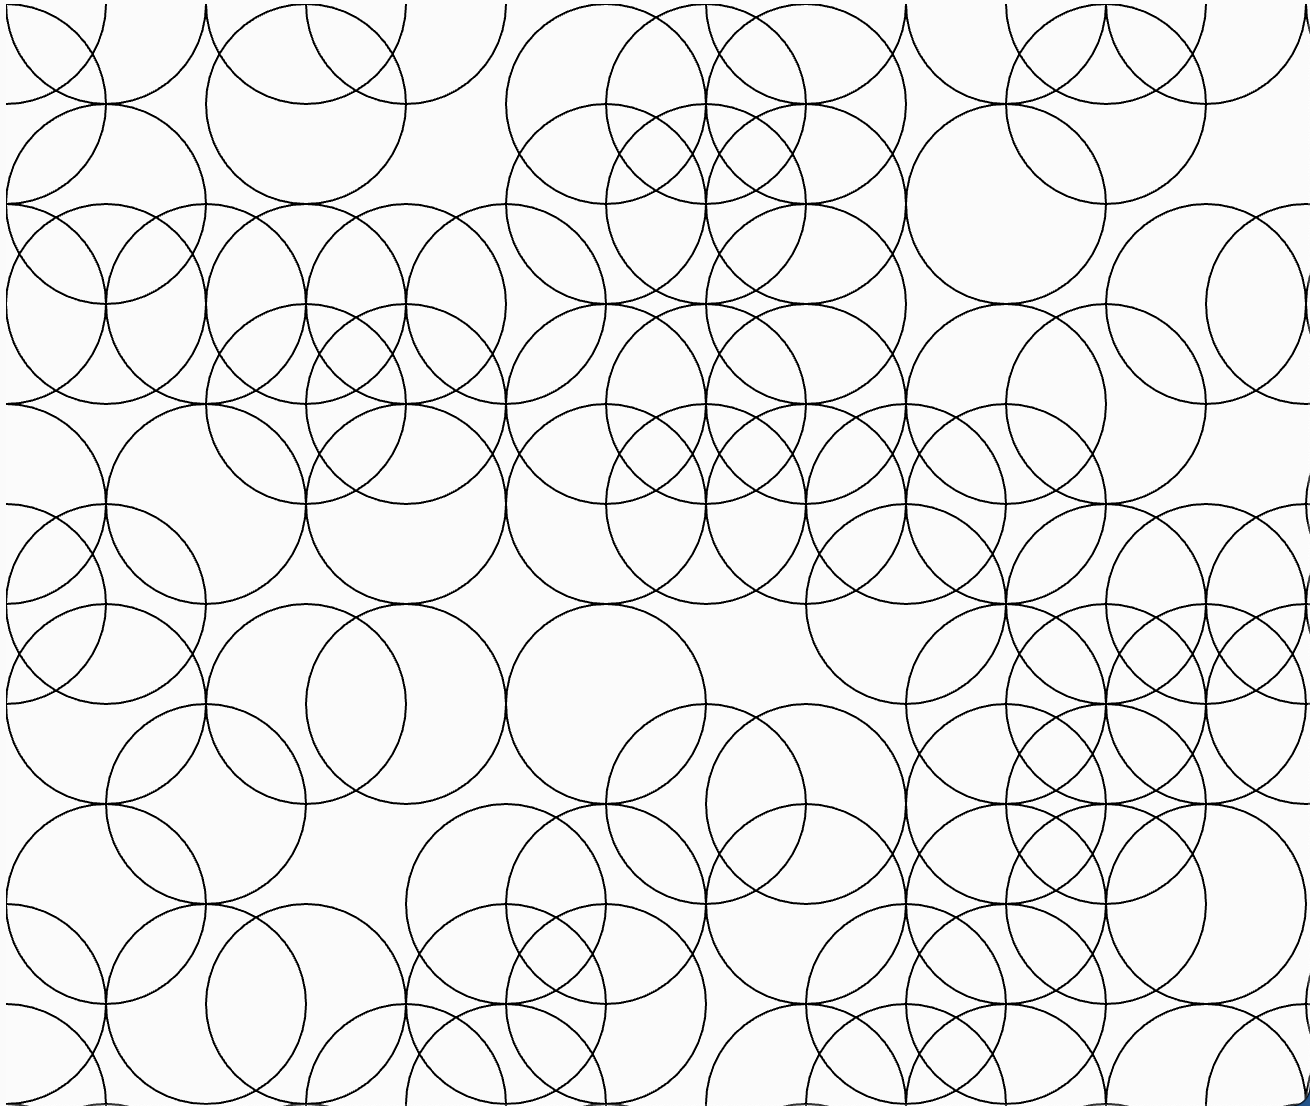 Composition with Circles